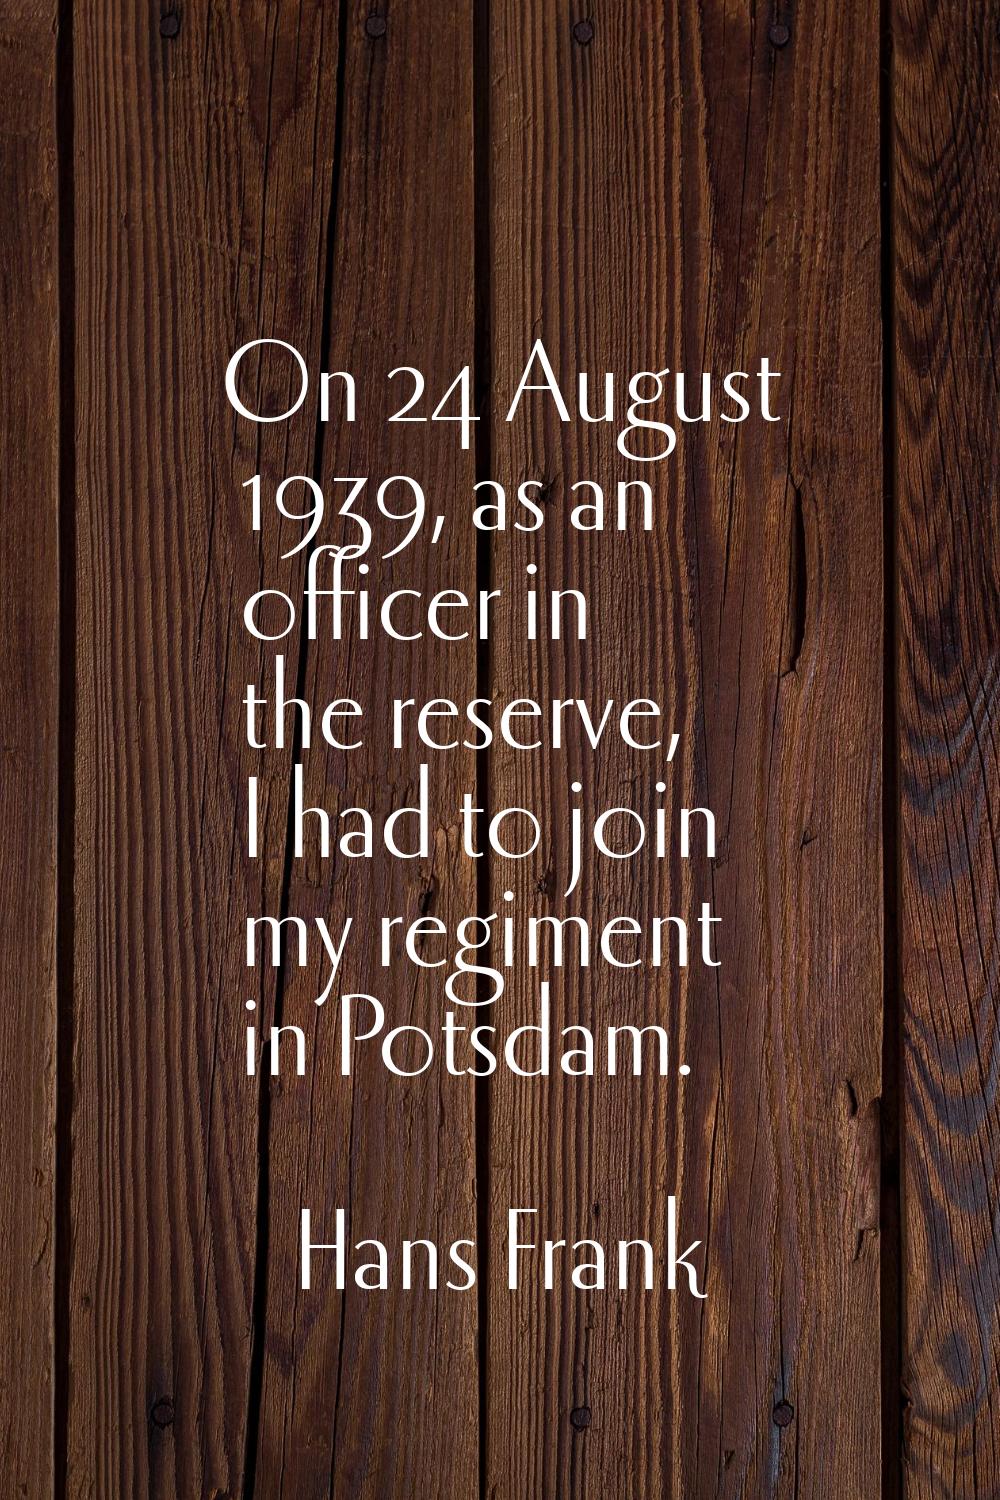 On 24 August 1939, as an officer in the reserve, I had to join my regiment in Potsdam.